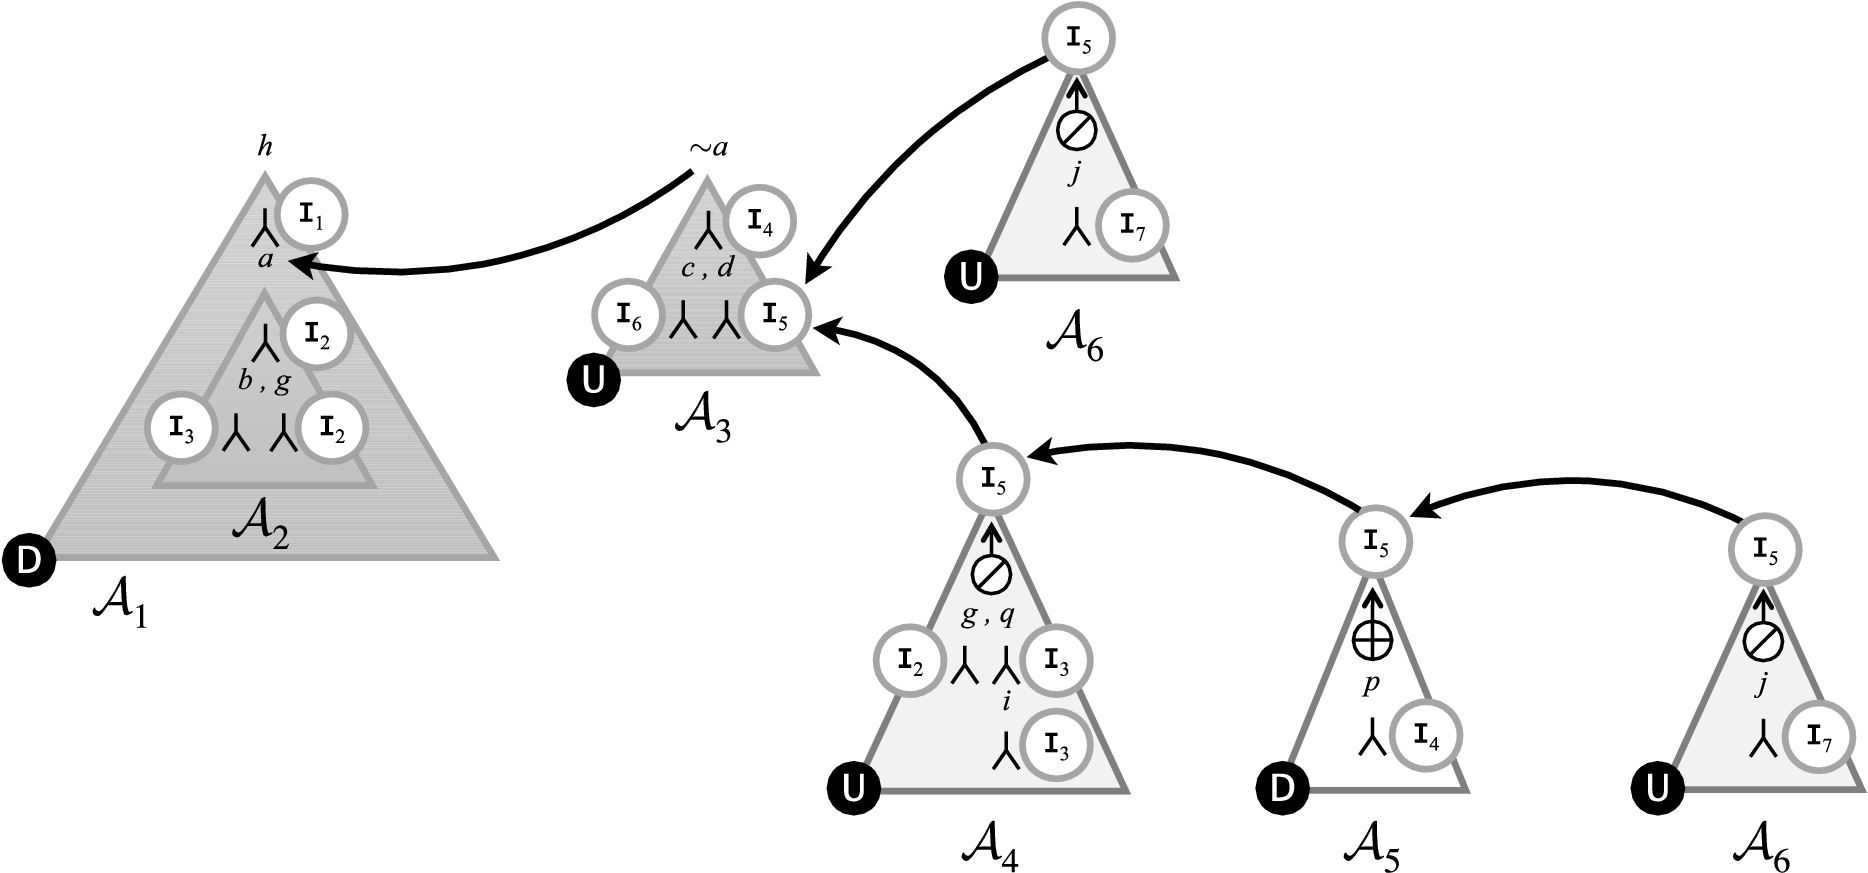 Marked dialectical tree T⟨A1,h⟩ from Example 9.